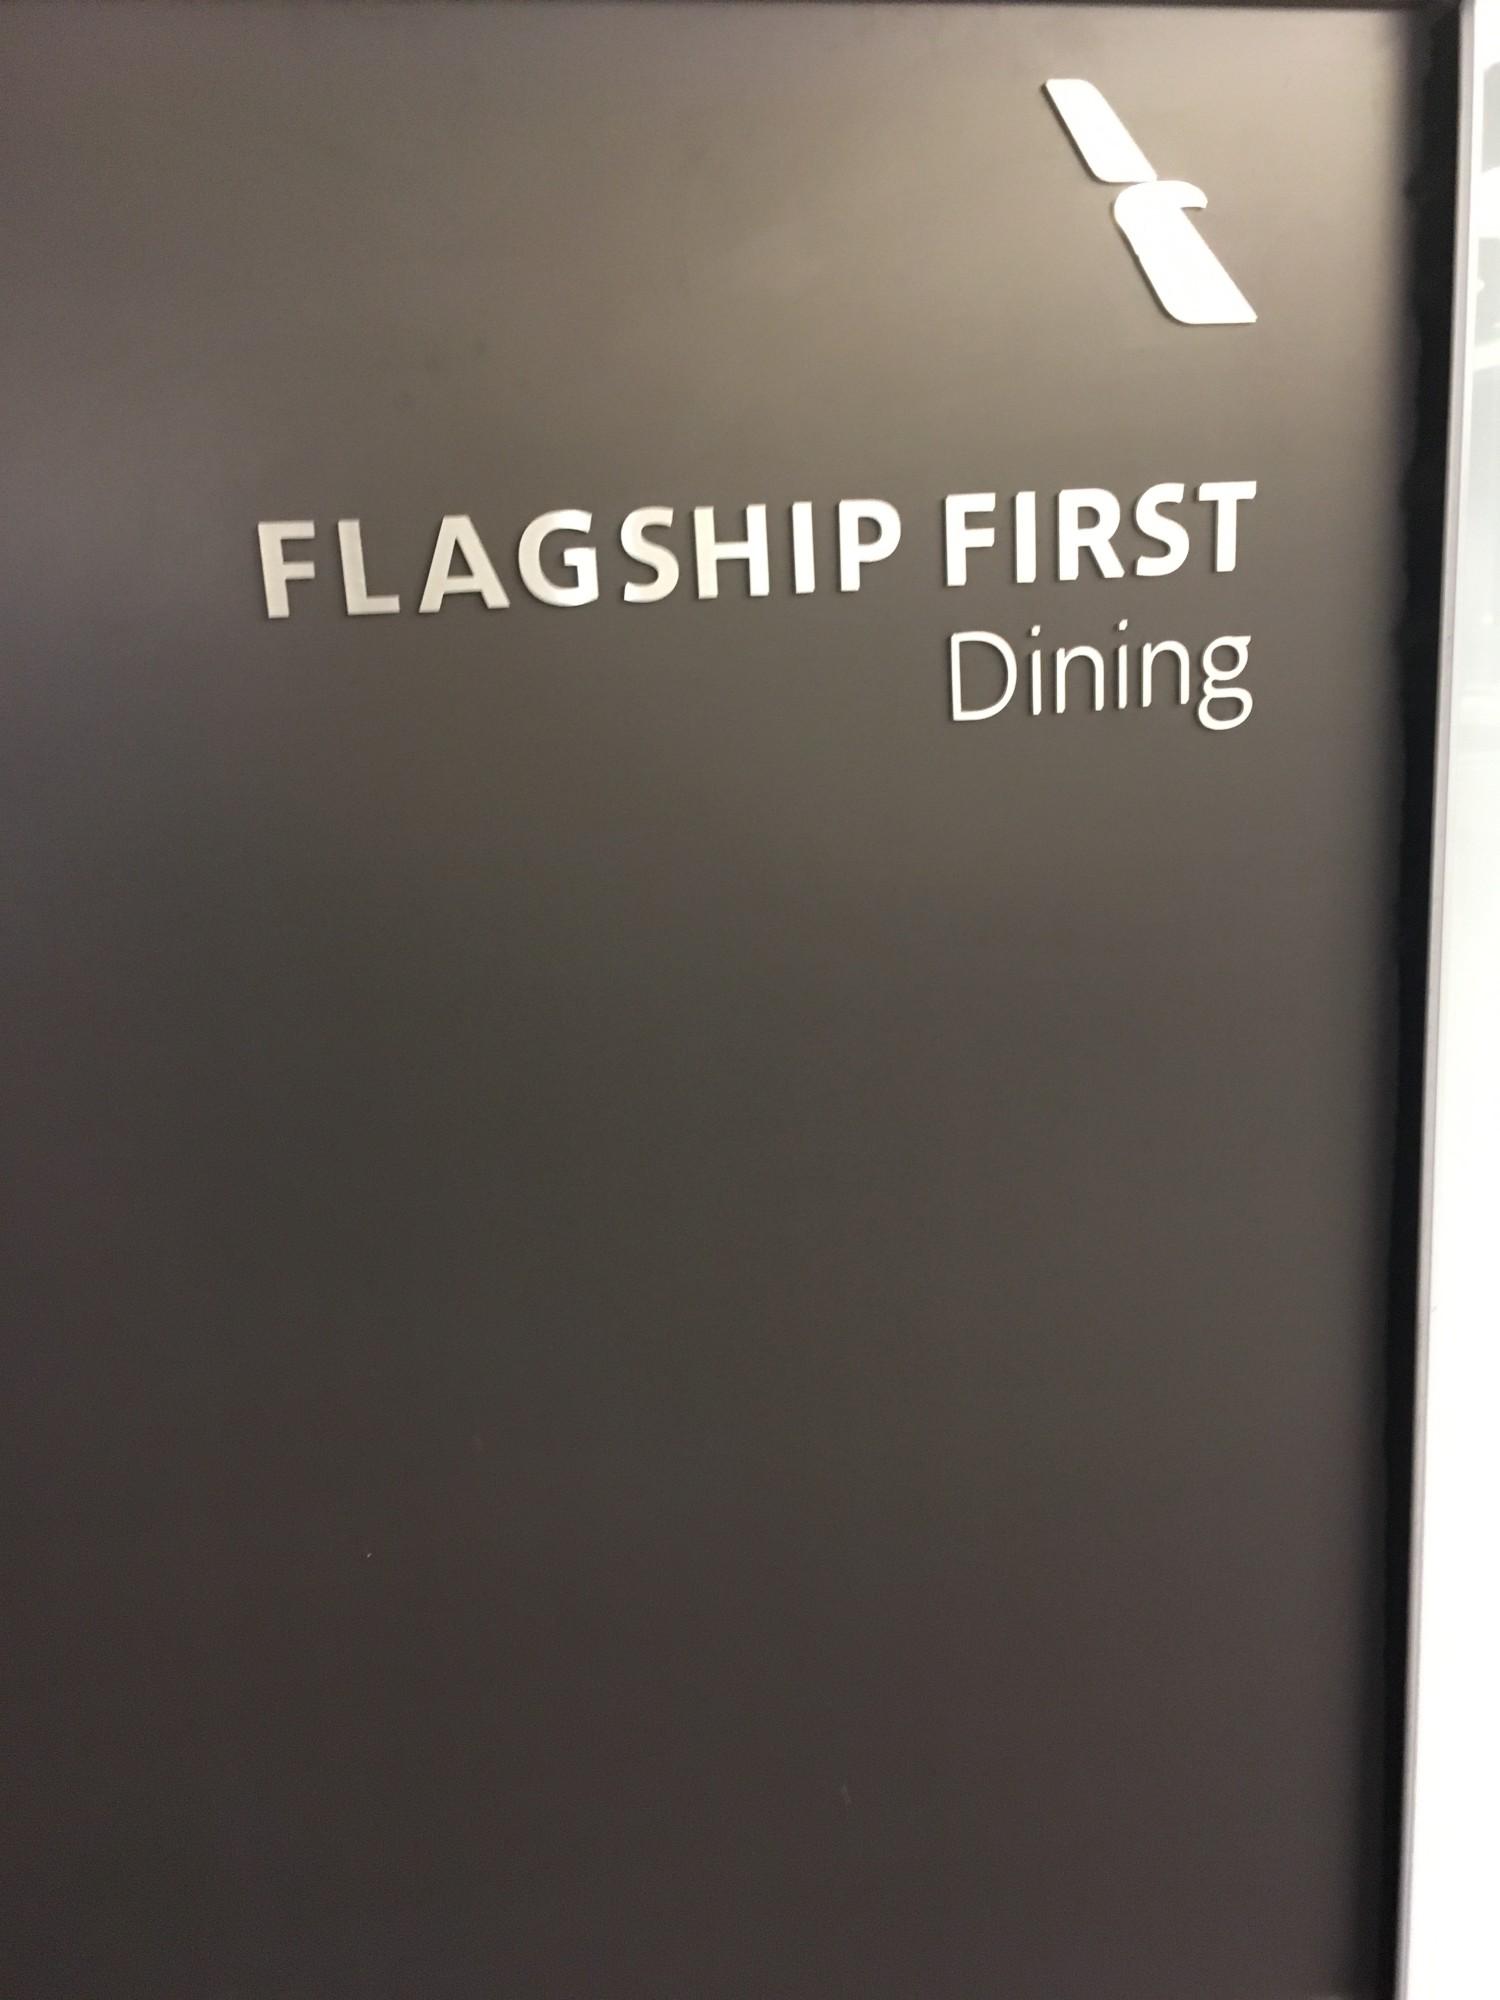 American Airlines Flagship First Dining image 4 of 5